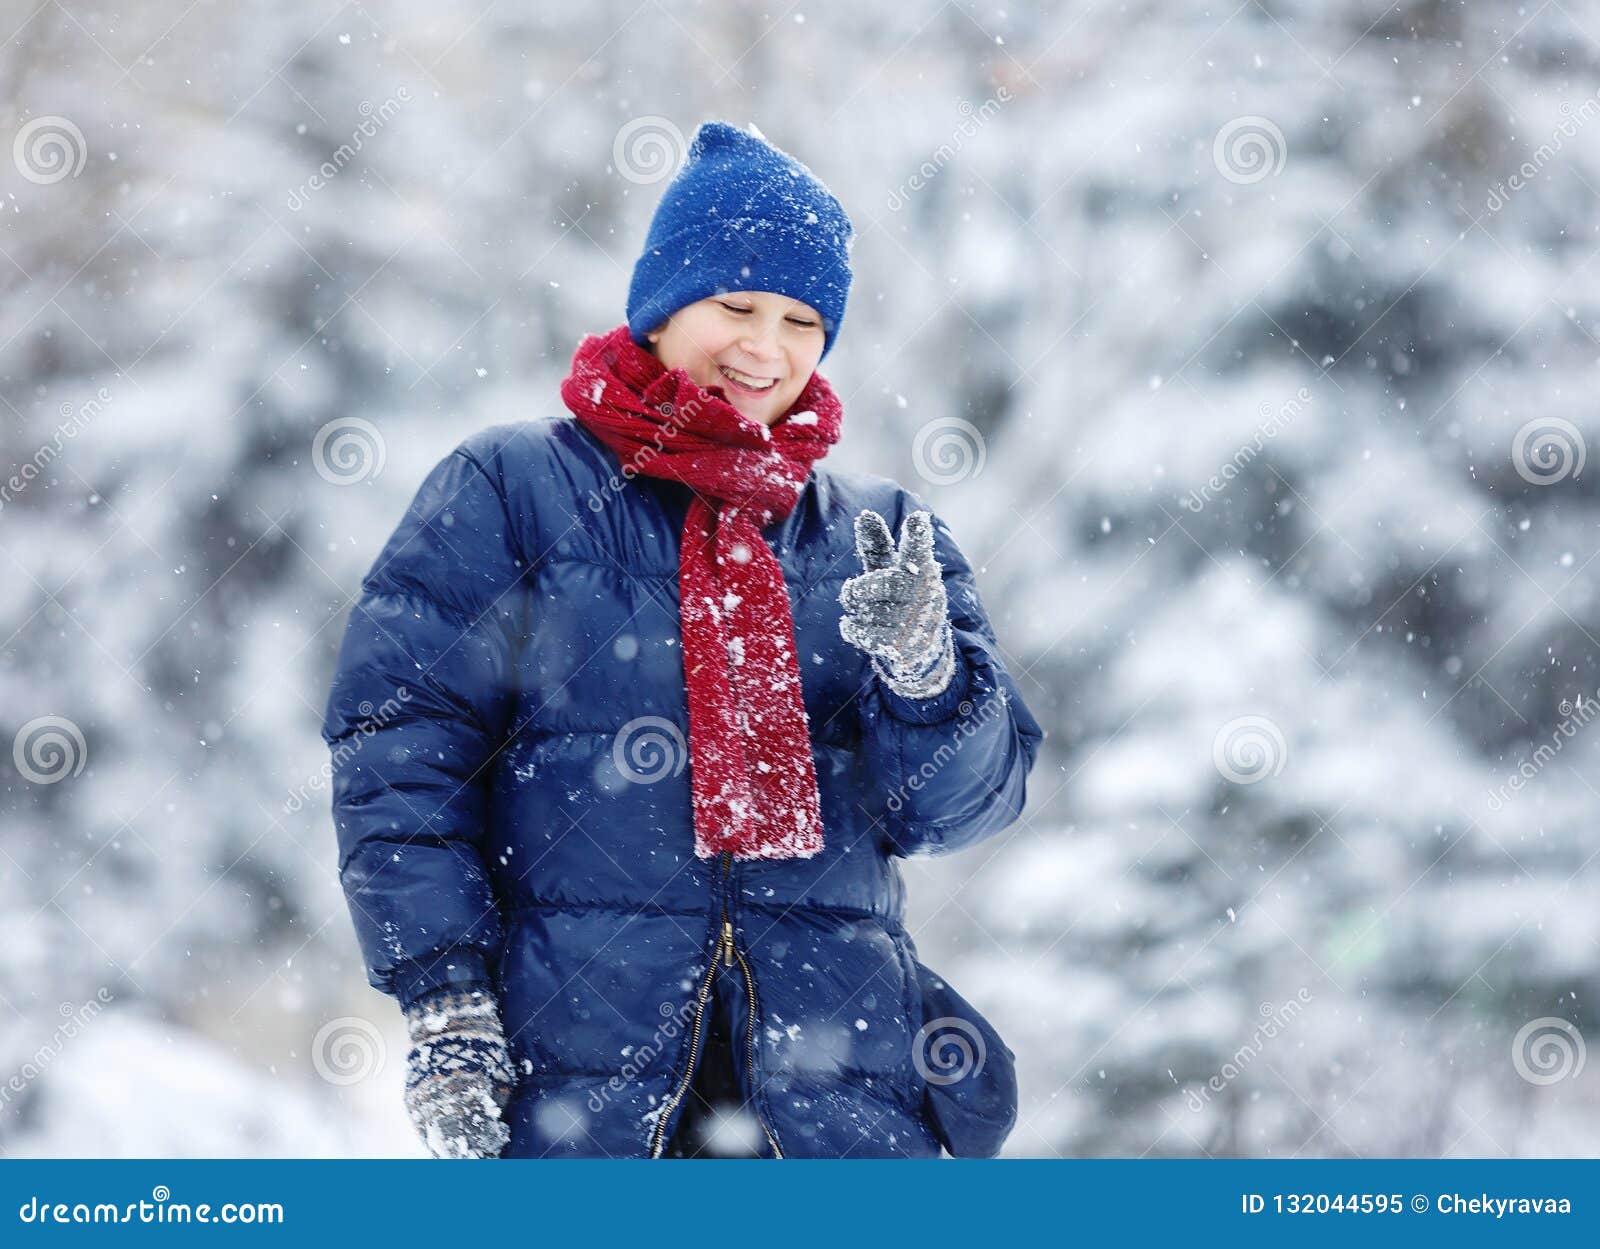 Cute, Cheerful Young Boy in Hat, Blue Jacket Plays with Snow, Has Fun ...